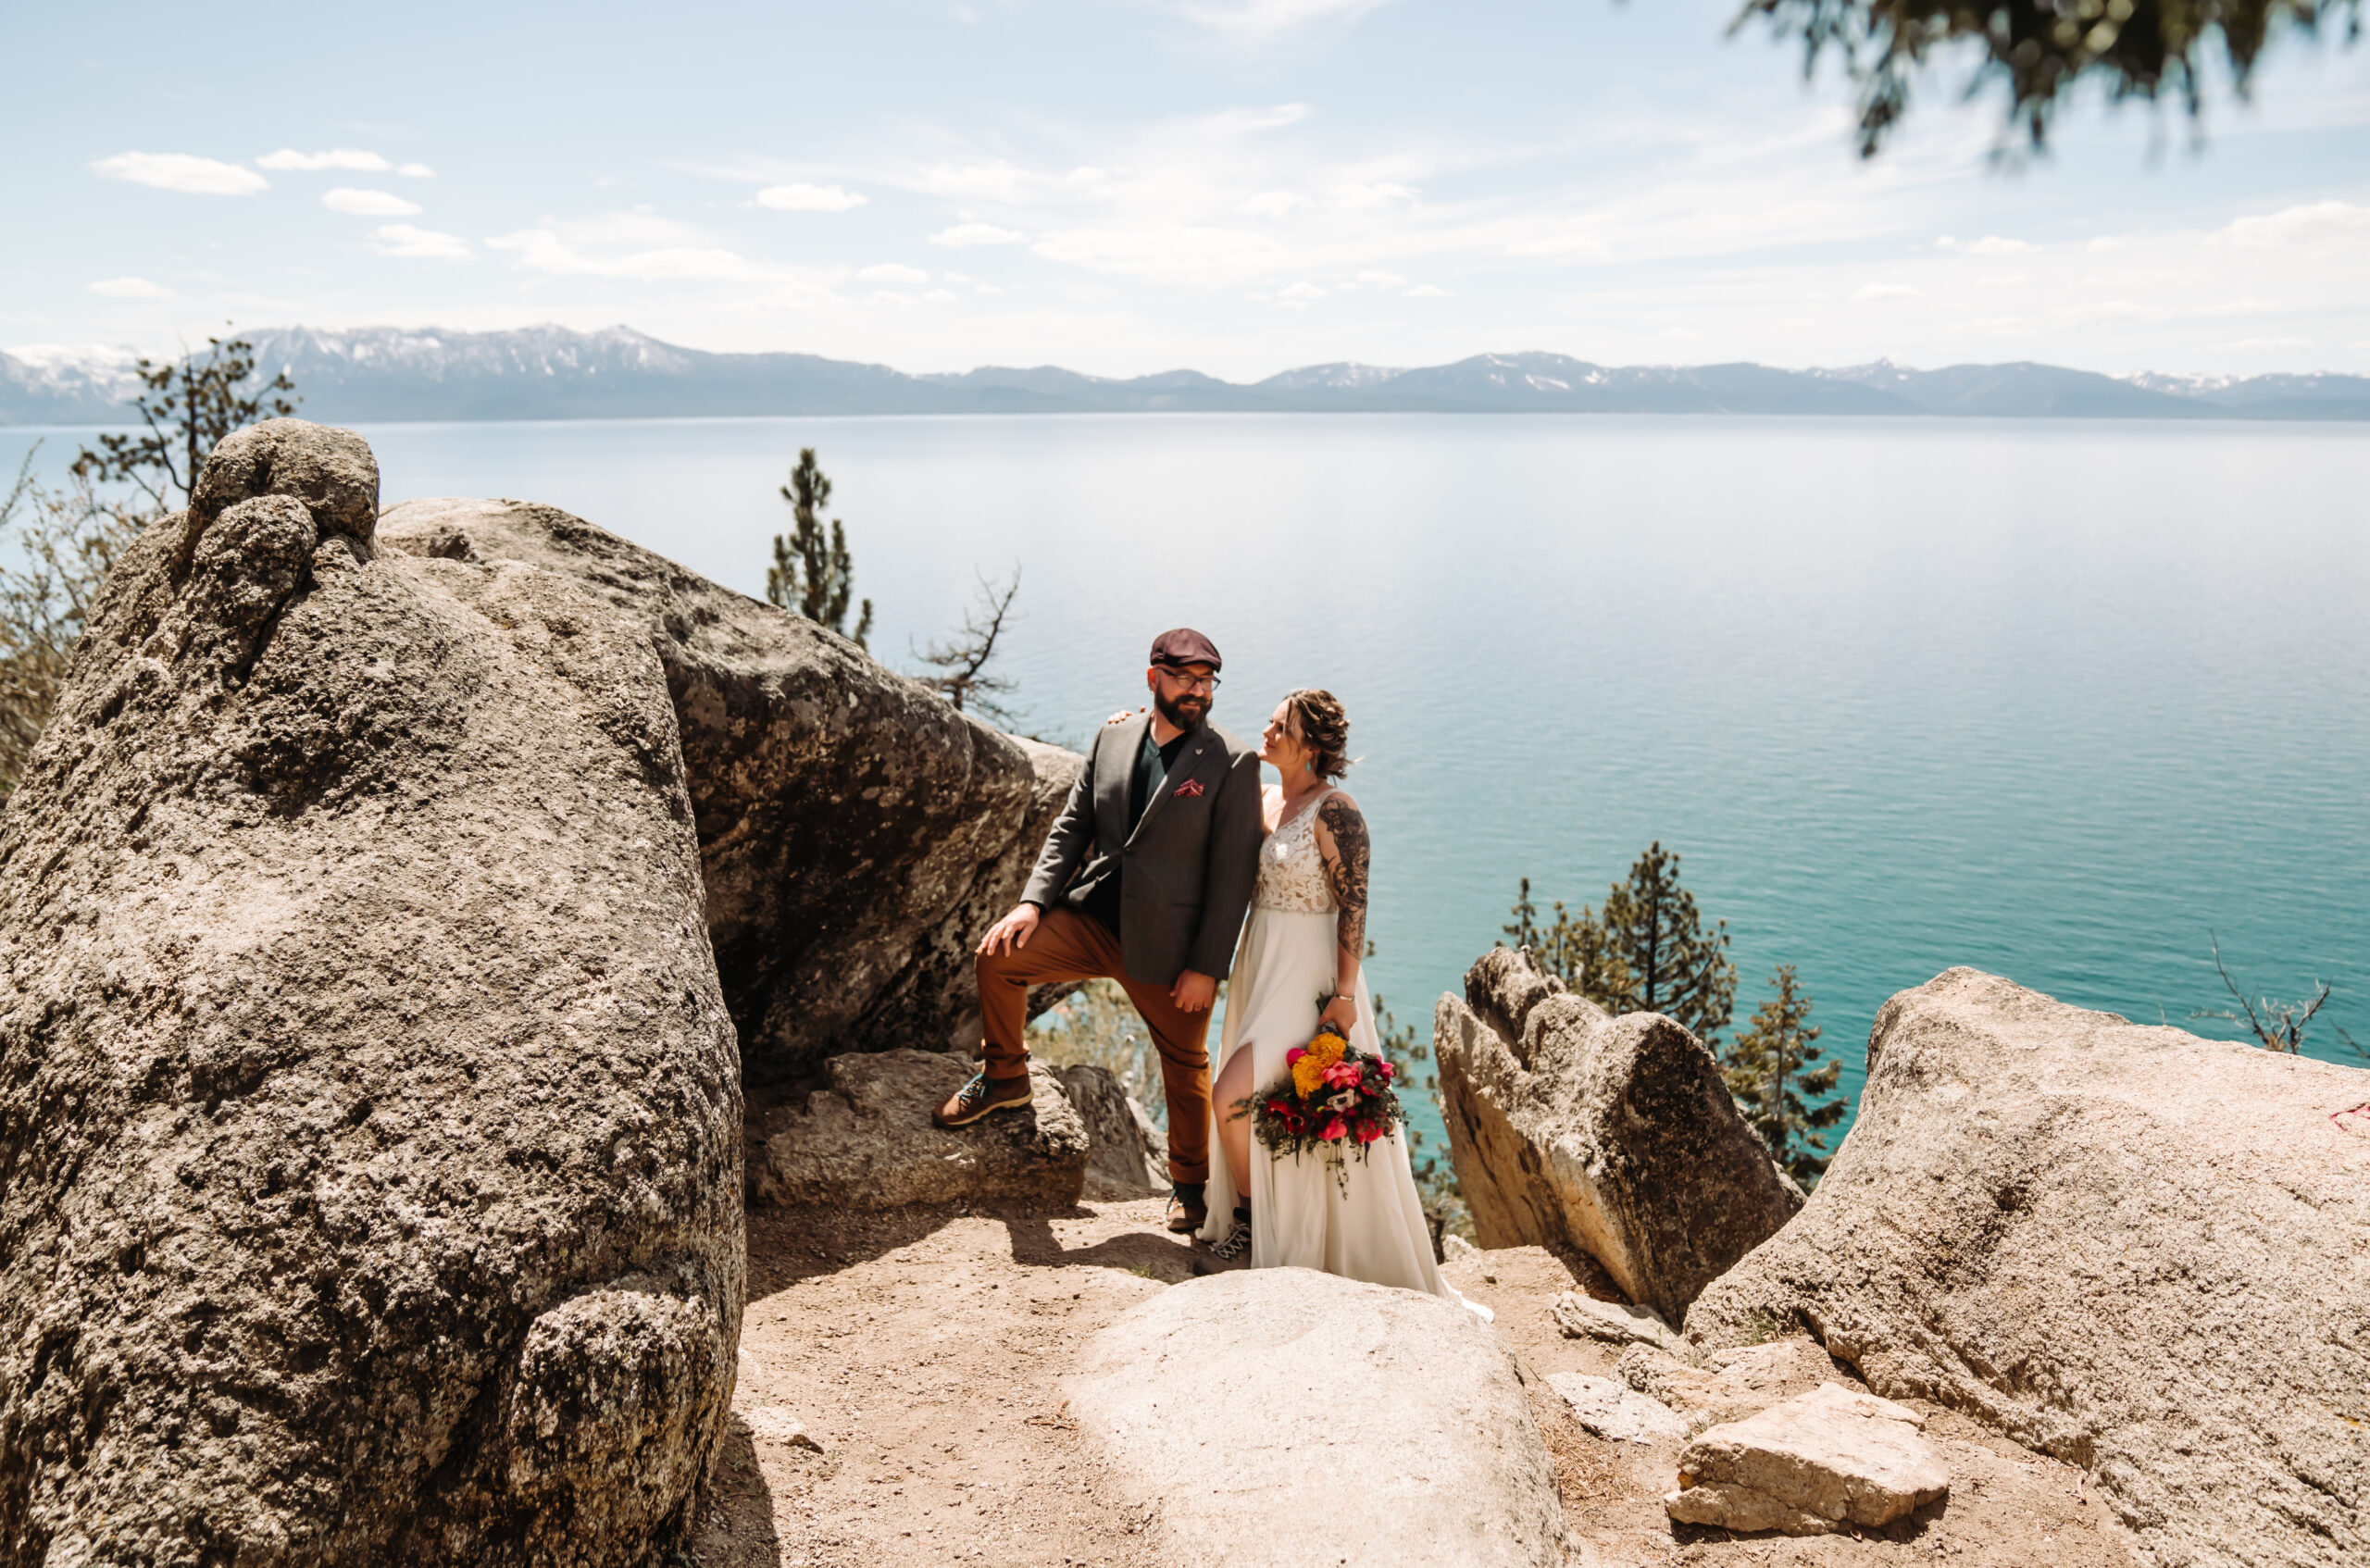 A wedding couple standing on a rock overlooking Lake Tahoe for their wedding day